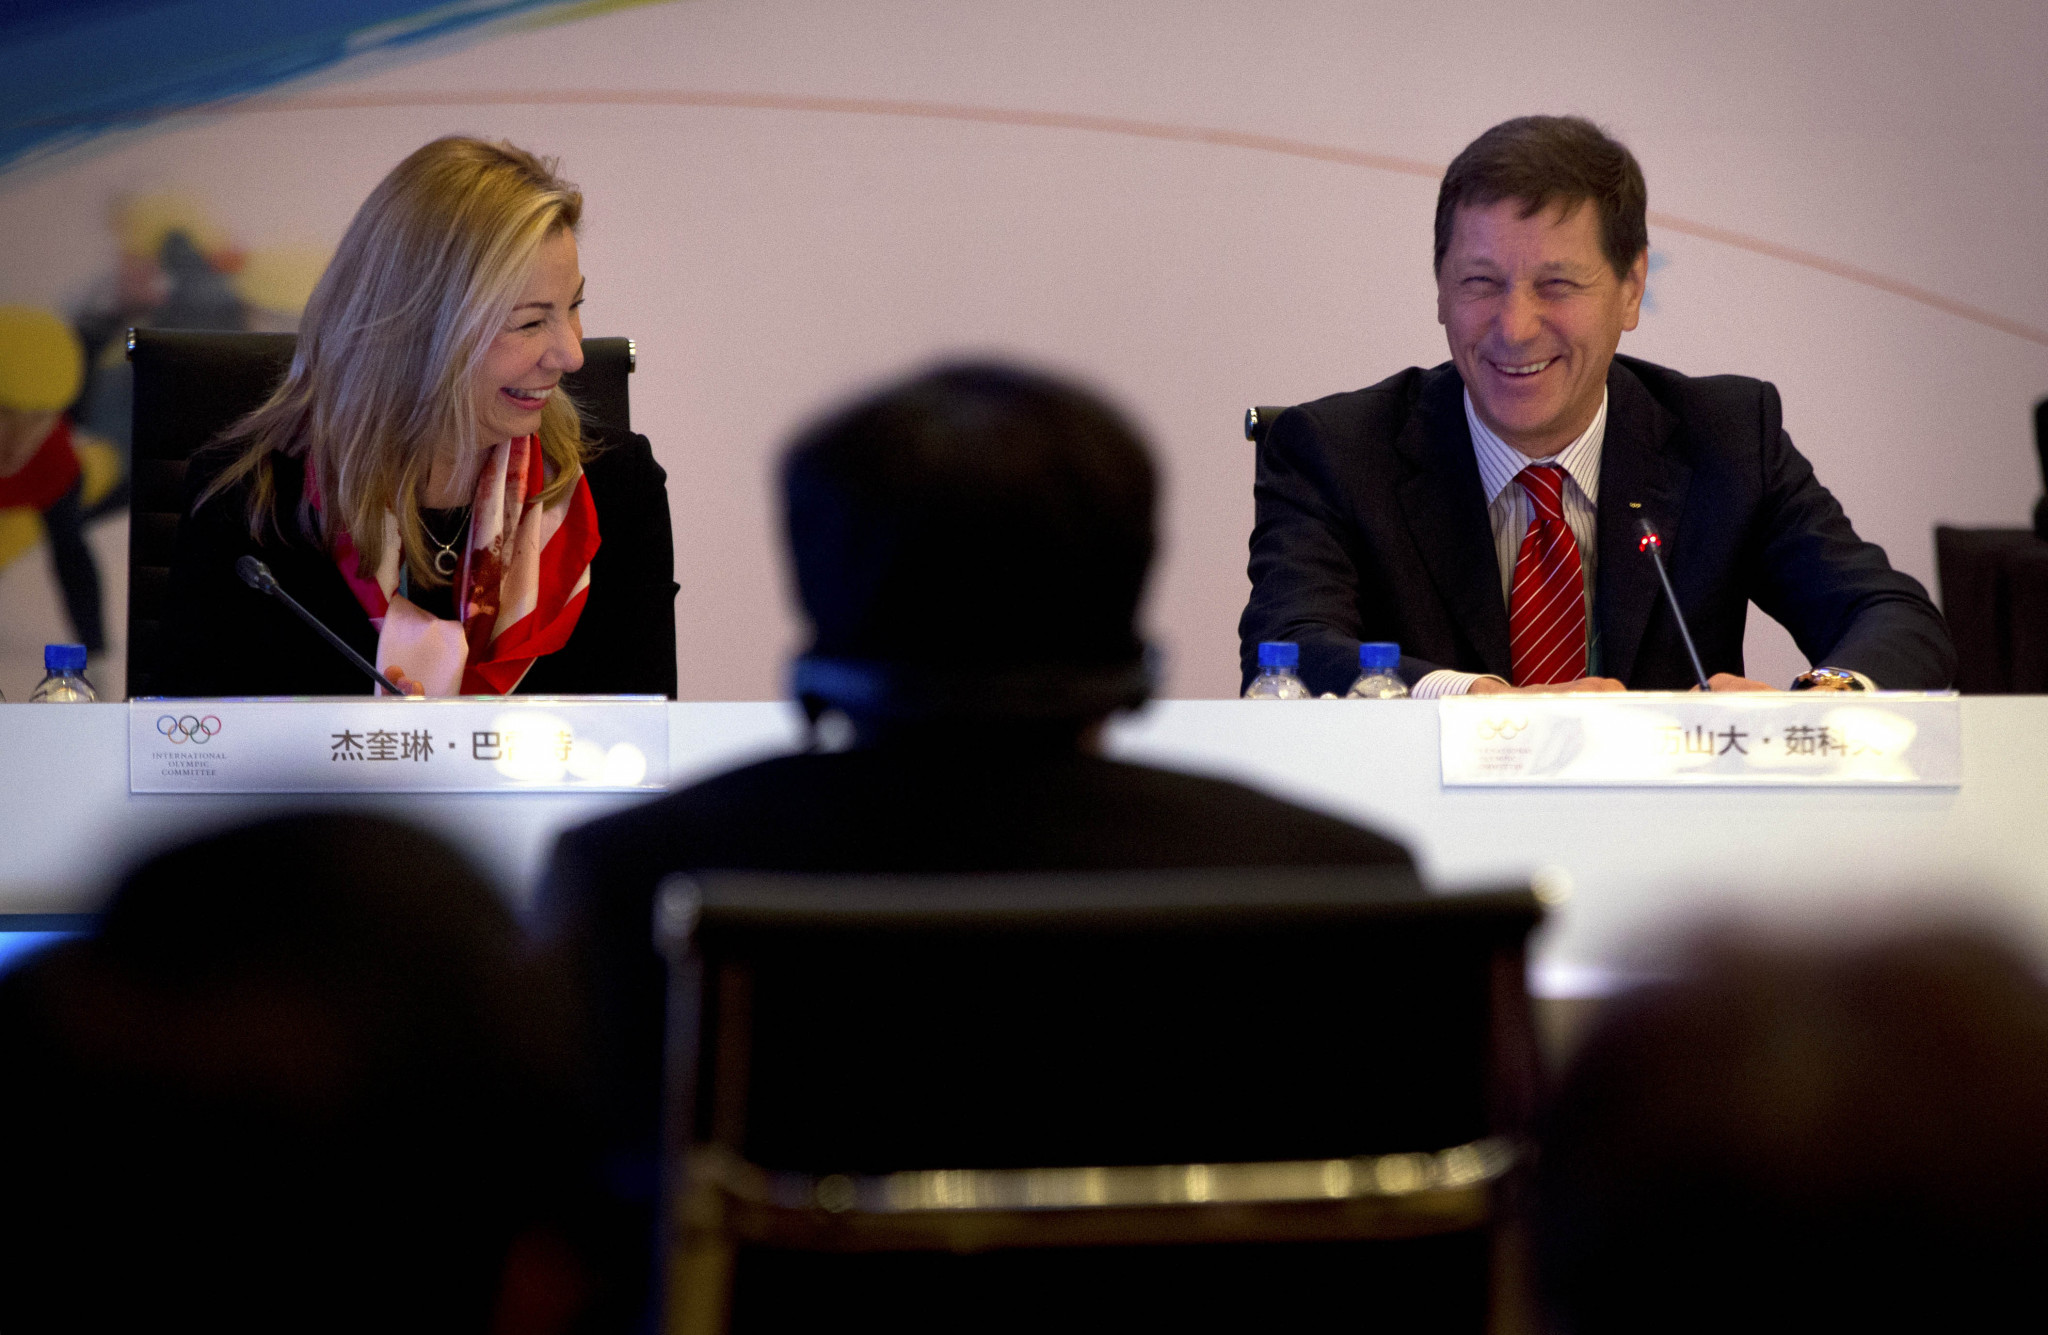 IOC director of future Olympic Games hosts Jacqueline Barrett, left, argued the new process for awarding the Games is beneficial because 